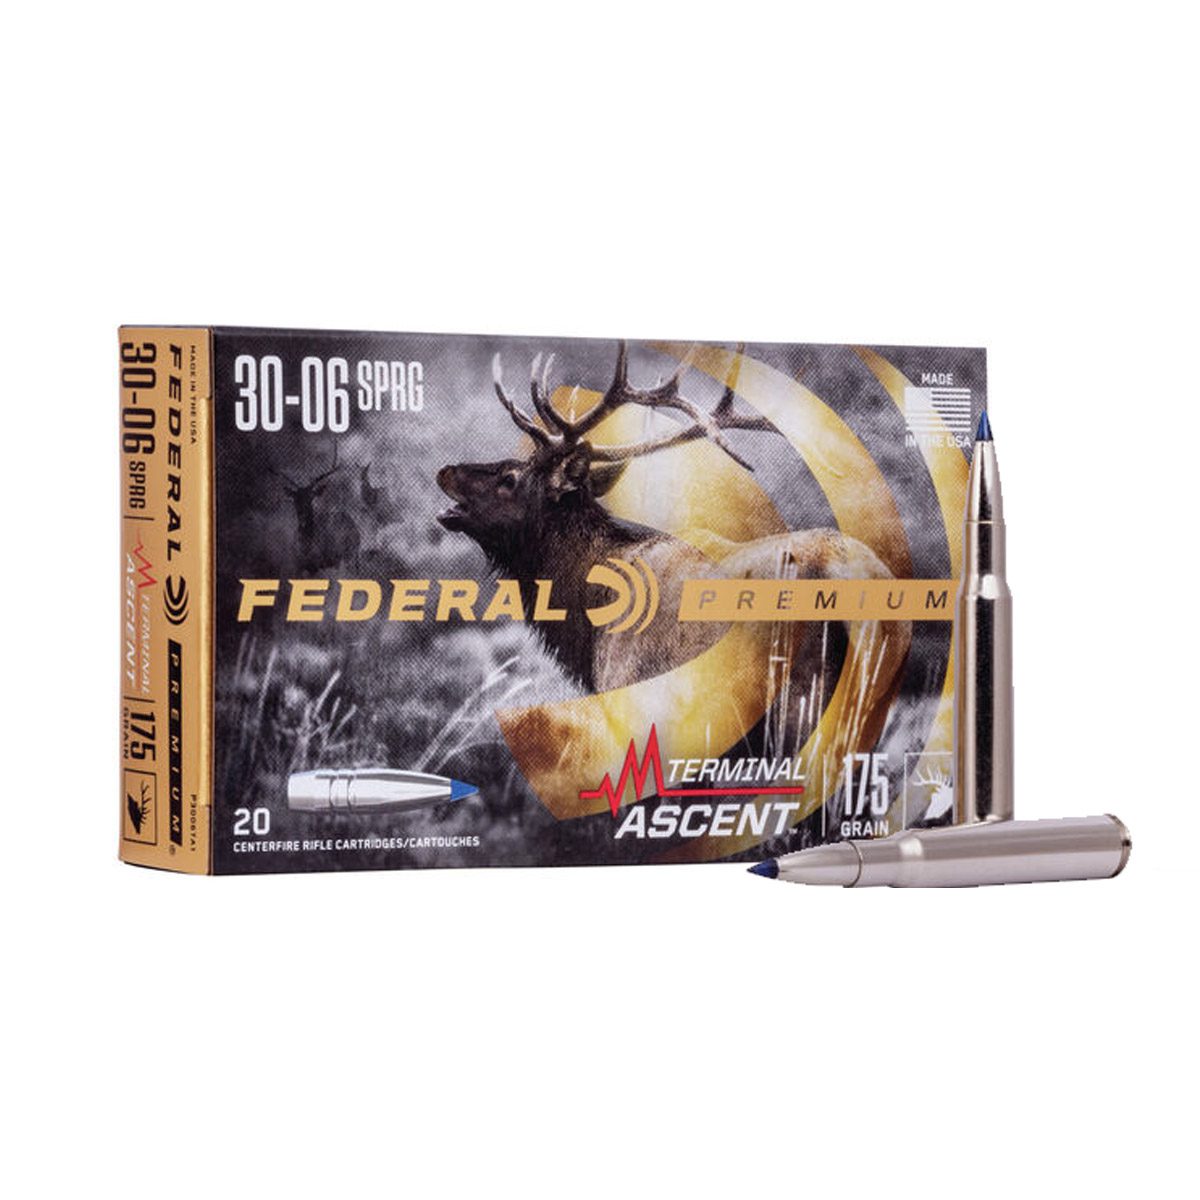 Federal Terminal Ascent 30-06 SPRG. 175 gr. – 20 Rounds